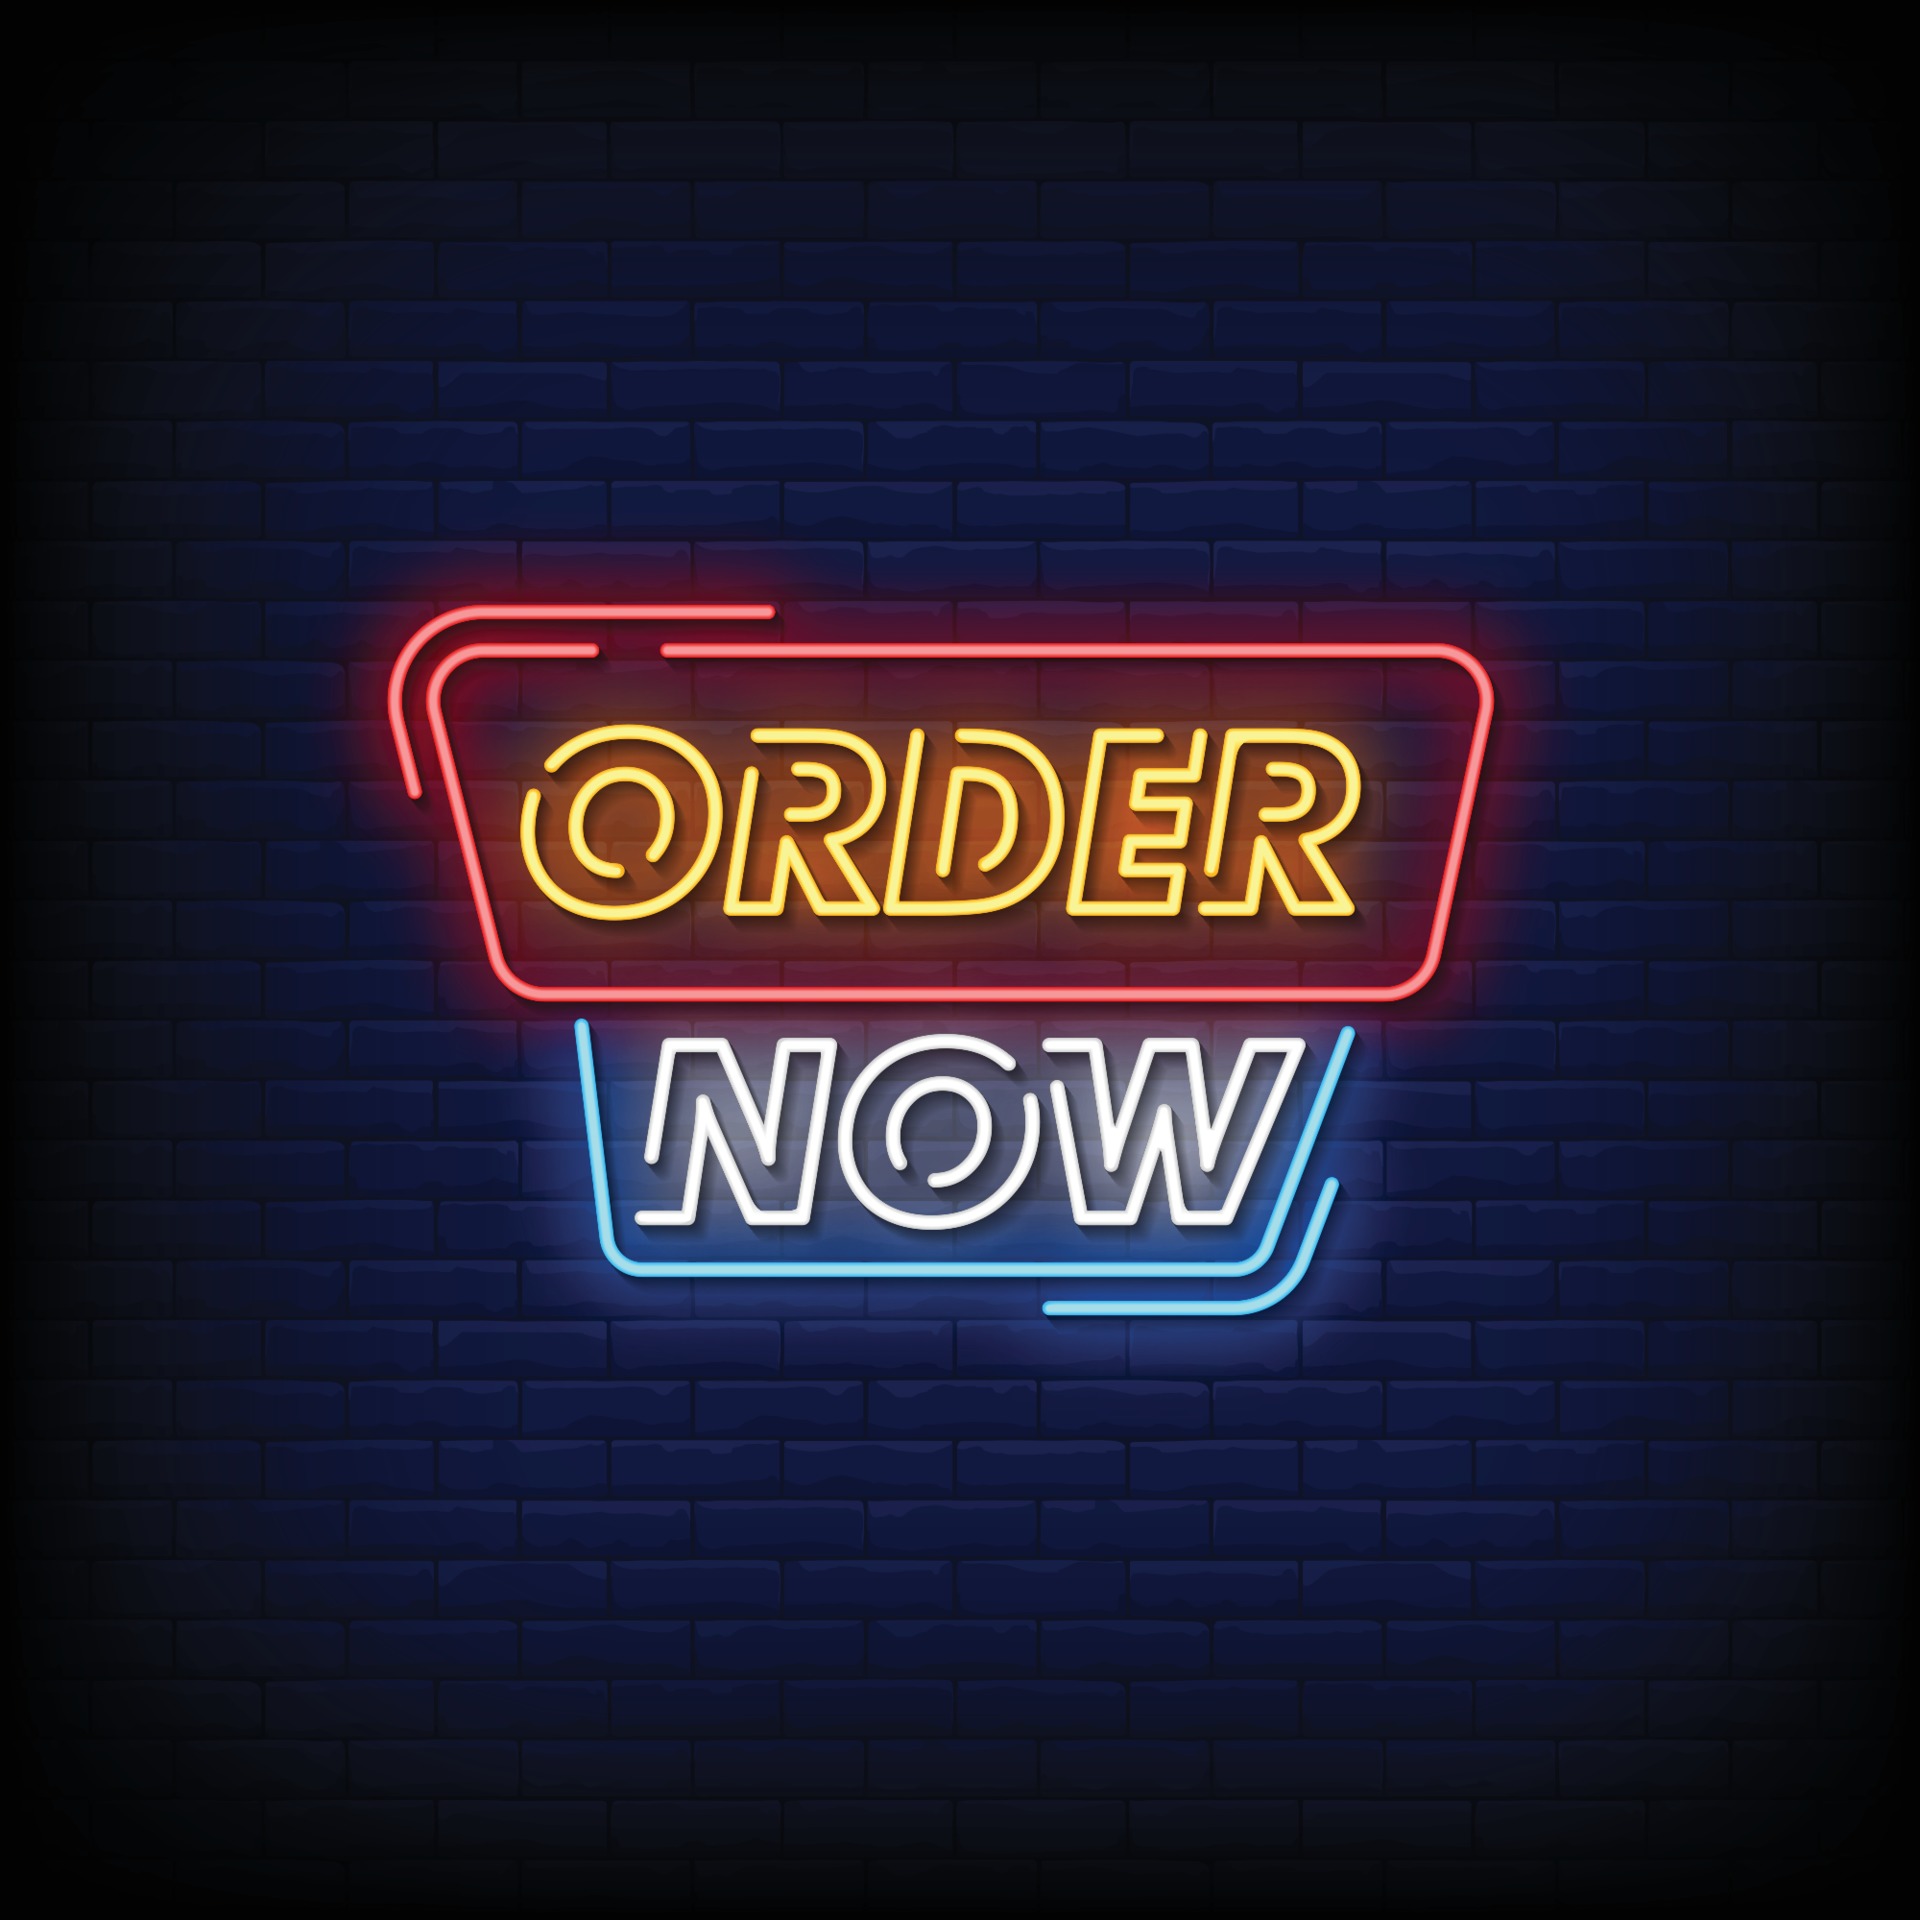 order-now-neon-signs-style-text-free-vector (1).jpg